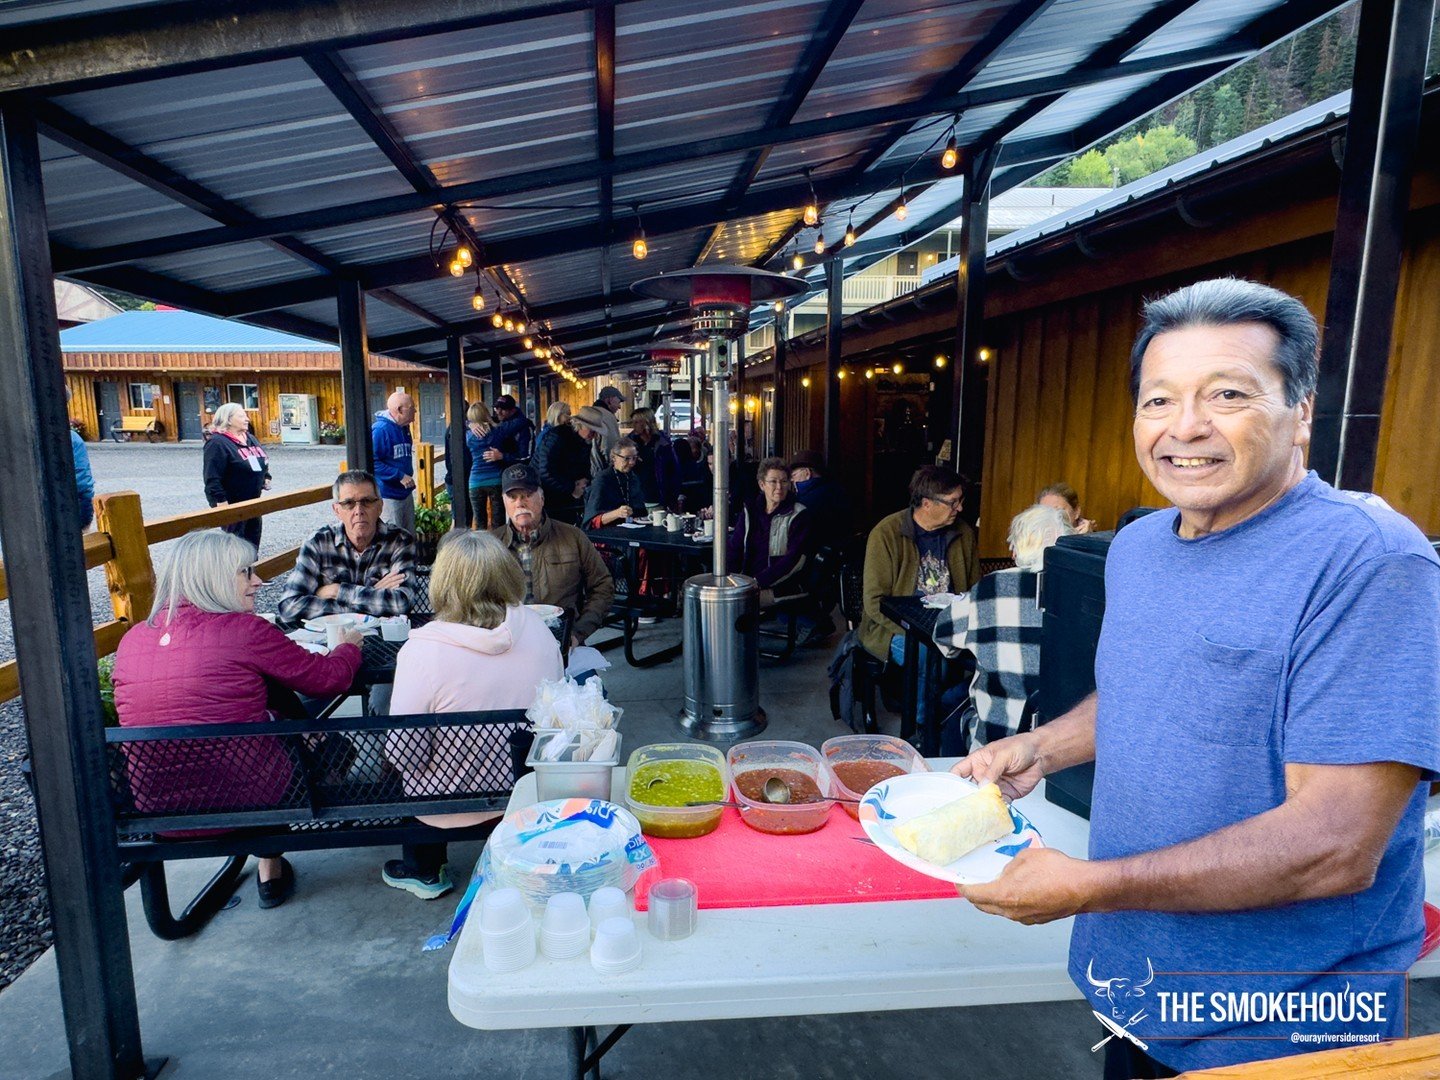 Okay, you know we love to cater events, but did you know you can host your catered event at our Smokehouse? Last summer, we had a group of RVers stay with us, and Bombie served his famous breakfast burritos! Needless to say, it was a huge hit. 

Reac